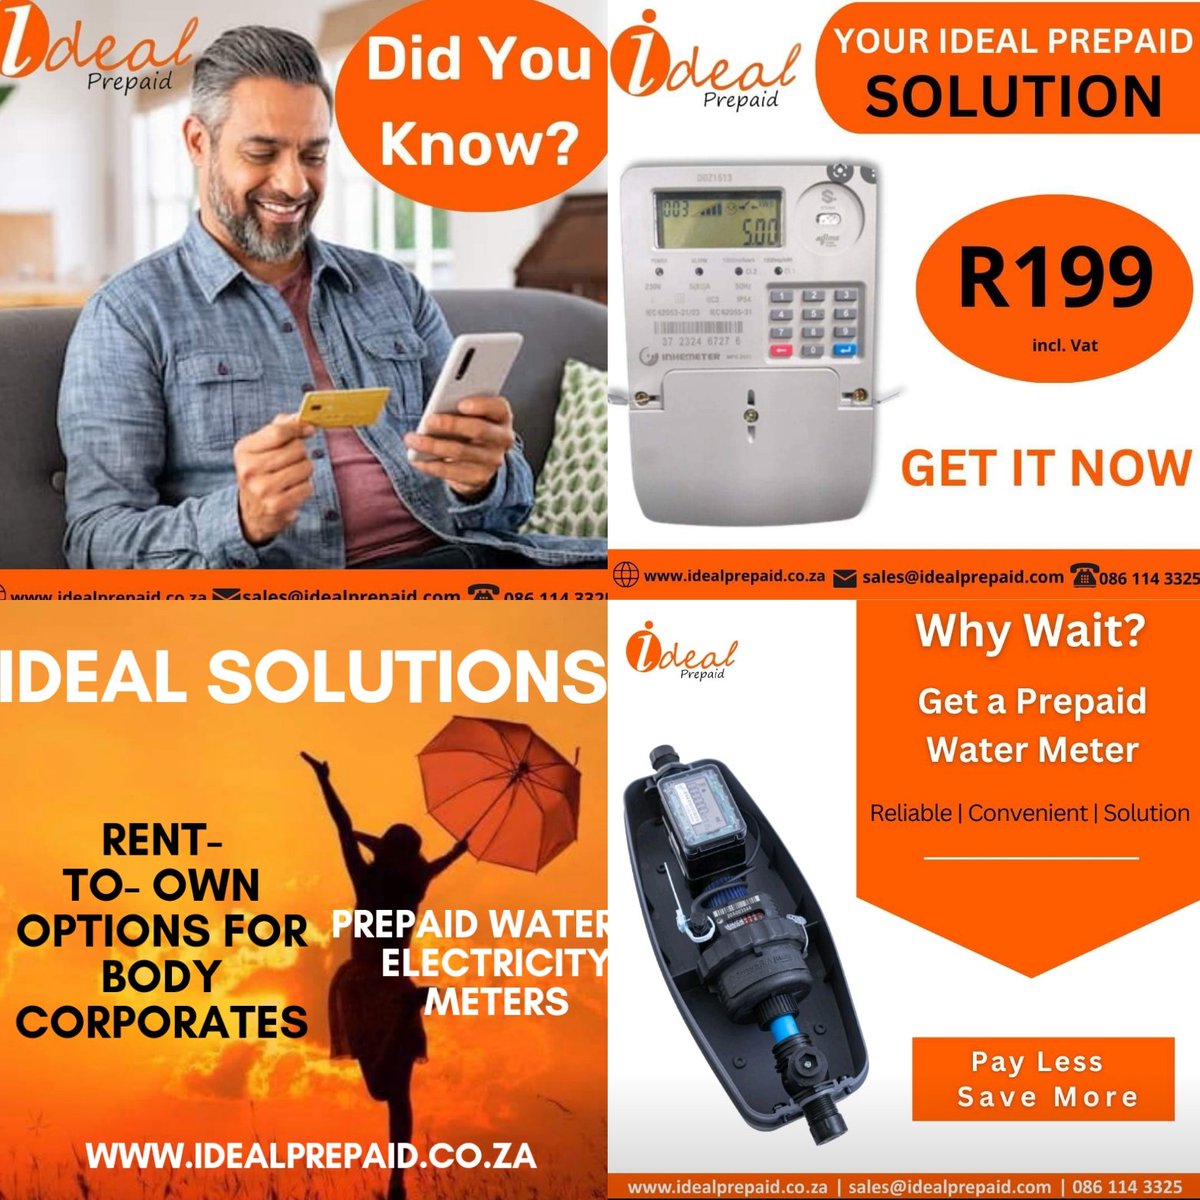 Did you know: Ideal Prepaid makes payments to #landlords, #bodycorporates, #distributors, and #managingagencies on the 1st of each month?
Payments may take 3-4 working days for the money to reflect, depending on the bank you use. 
Call+27835569848
#prepaidmeters #idealprepaid